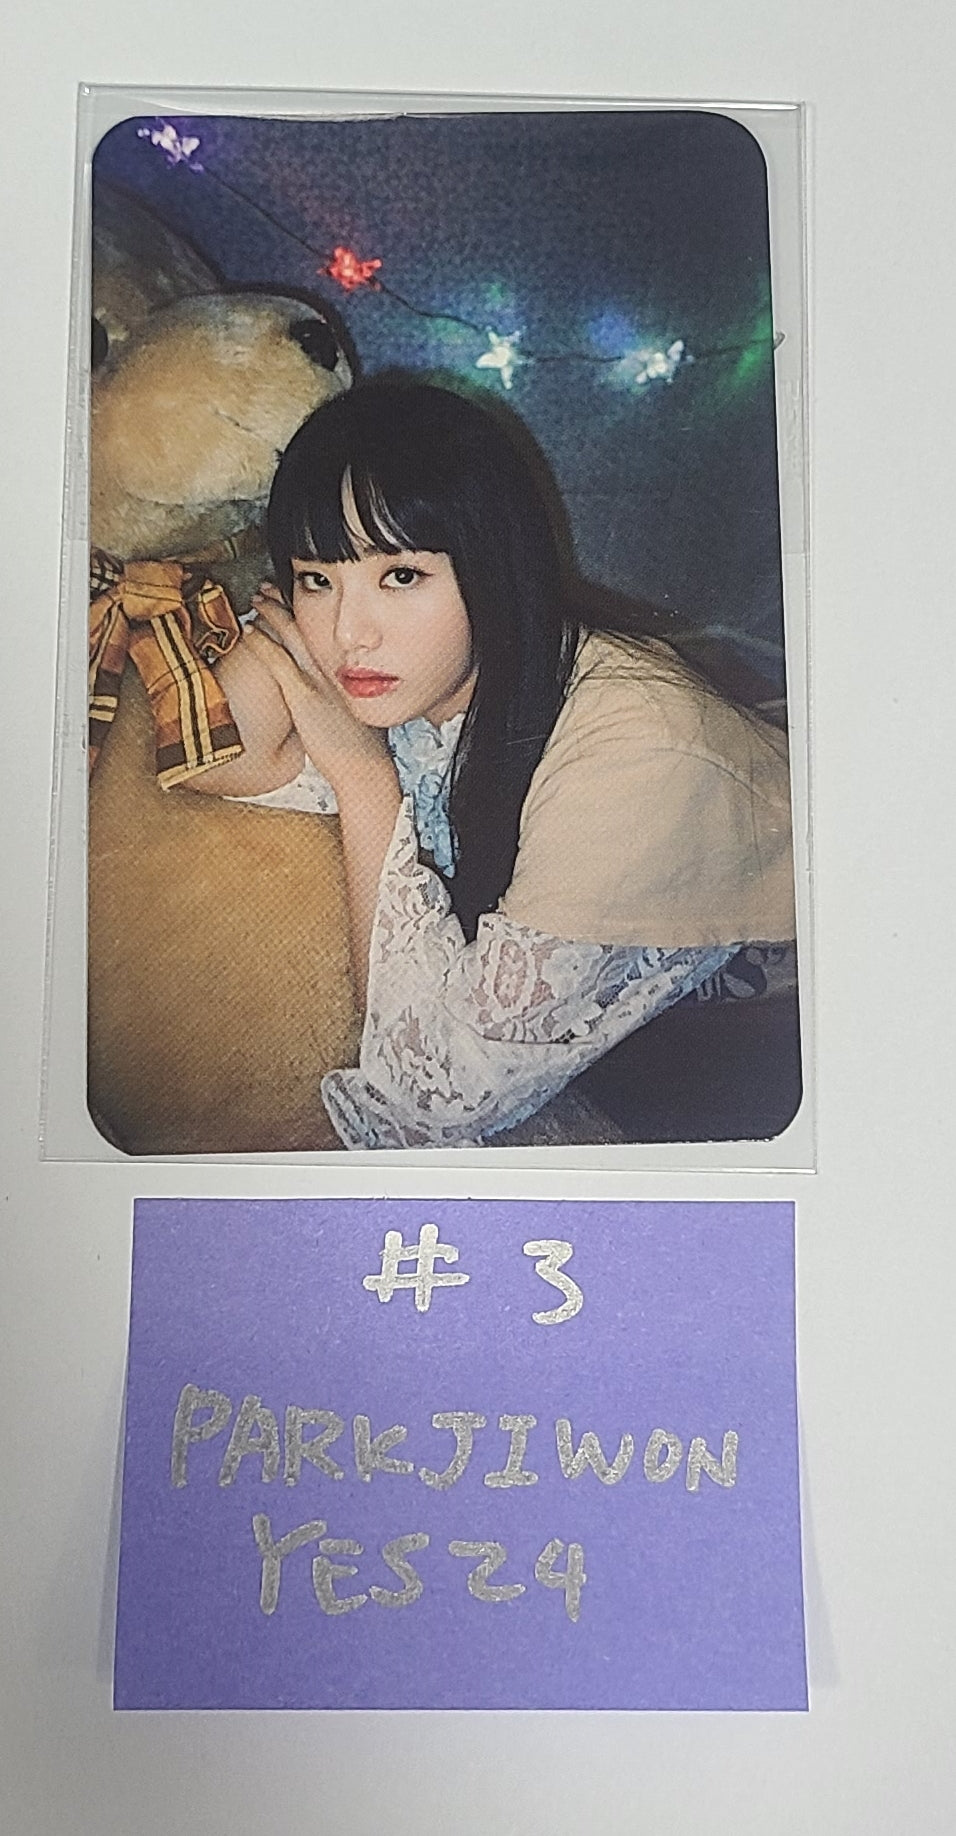 Fromis_9 "Unlock My World" - Yes24 Fansign Event Photocard